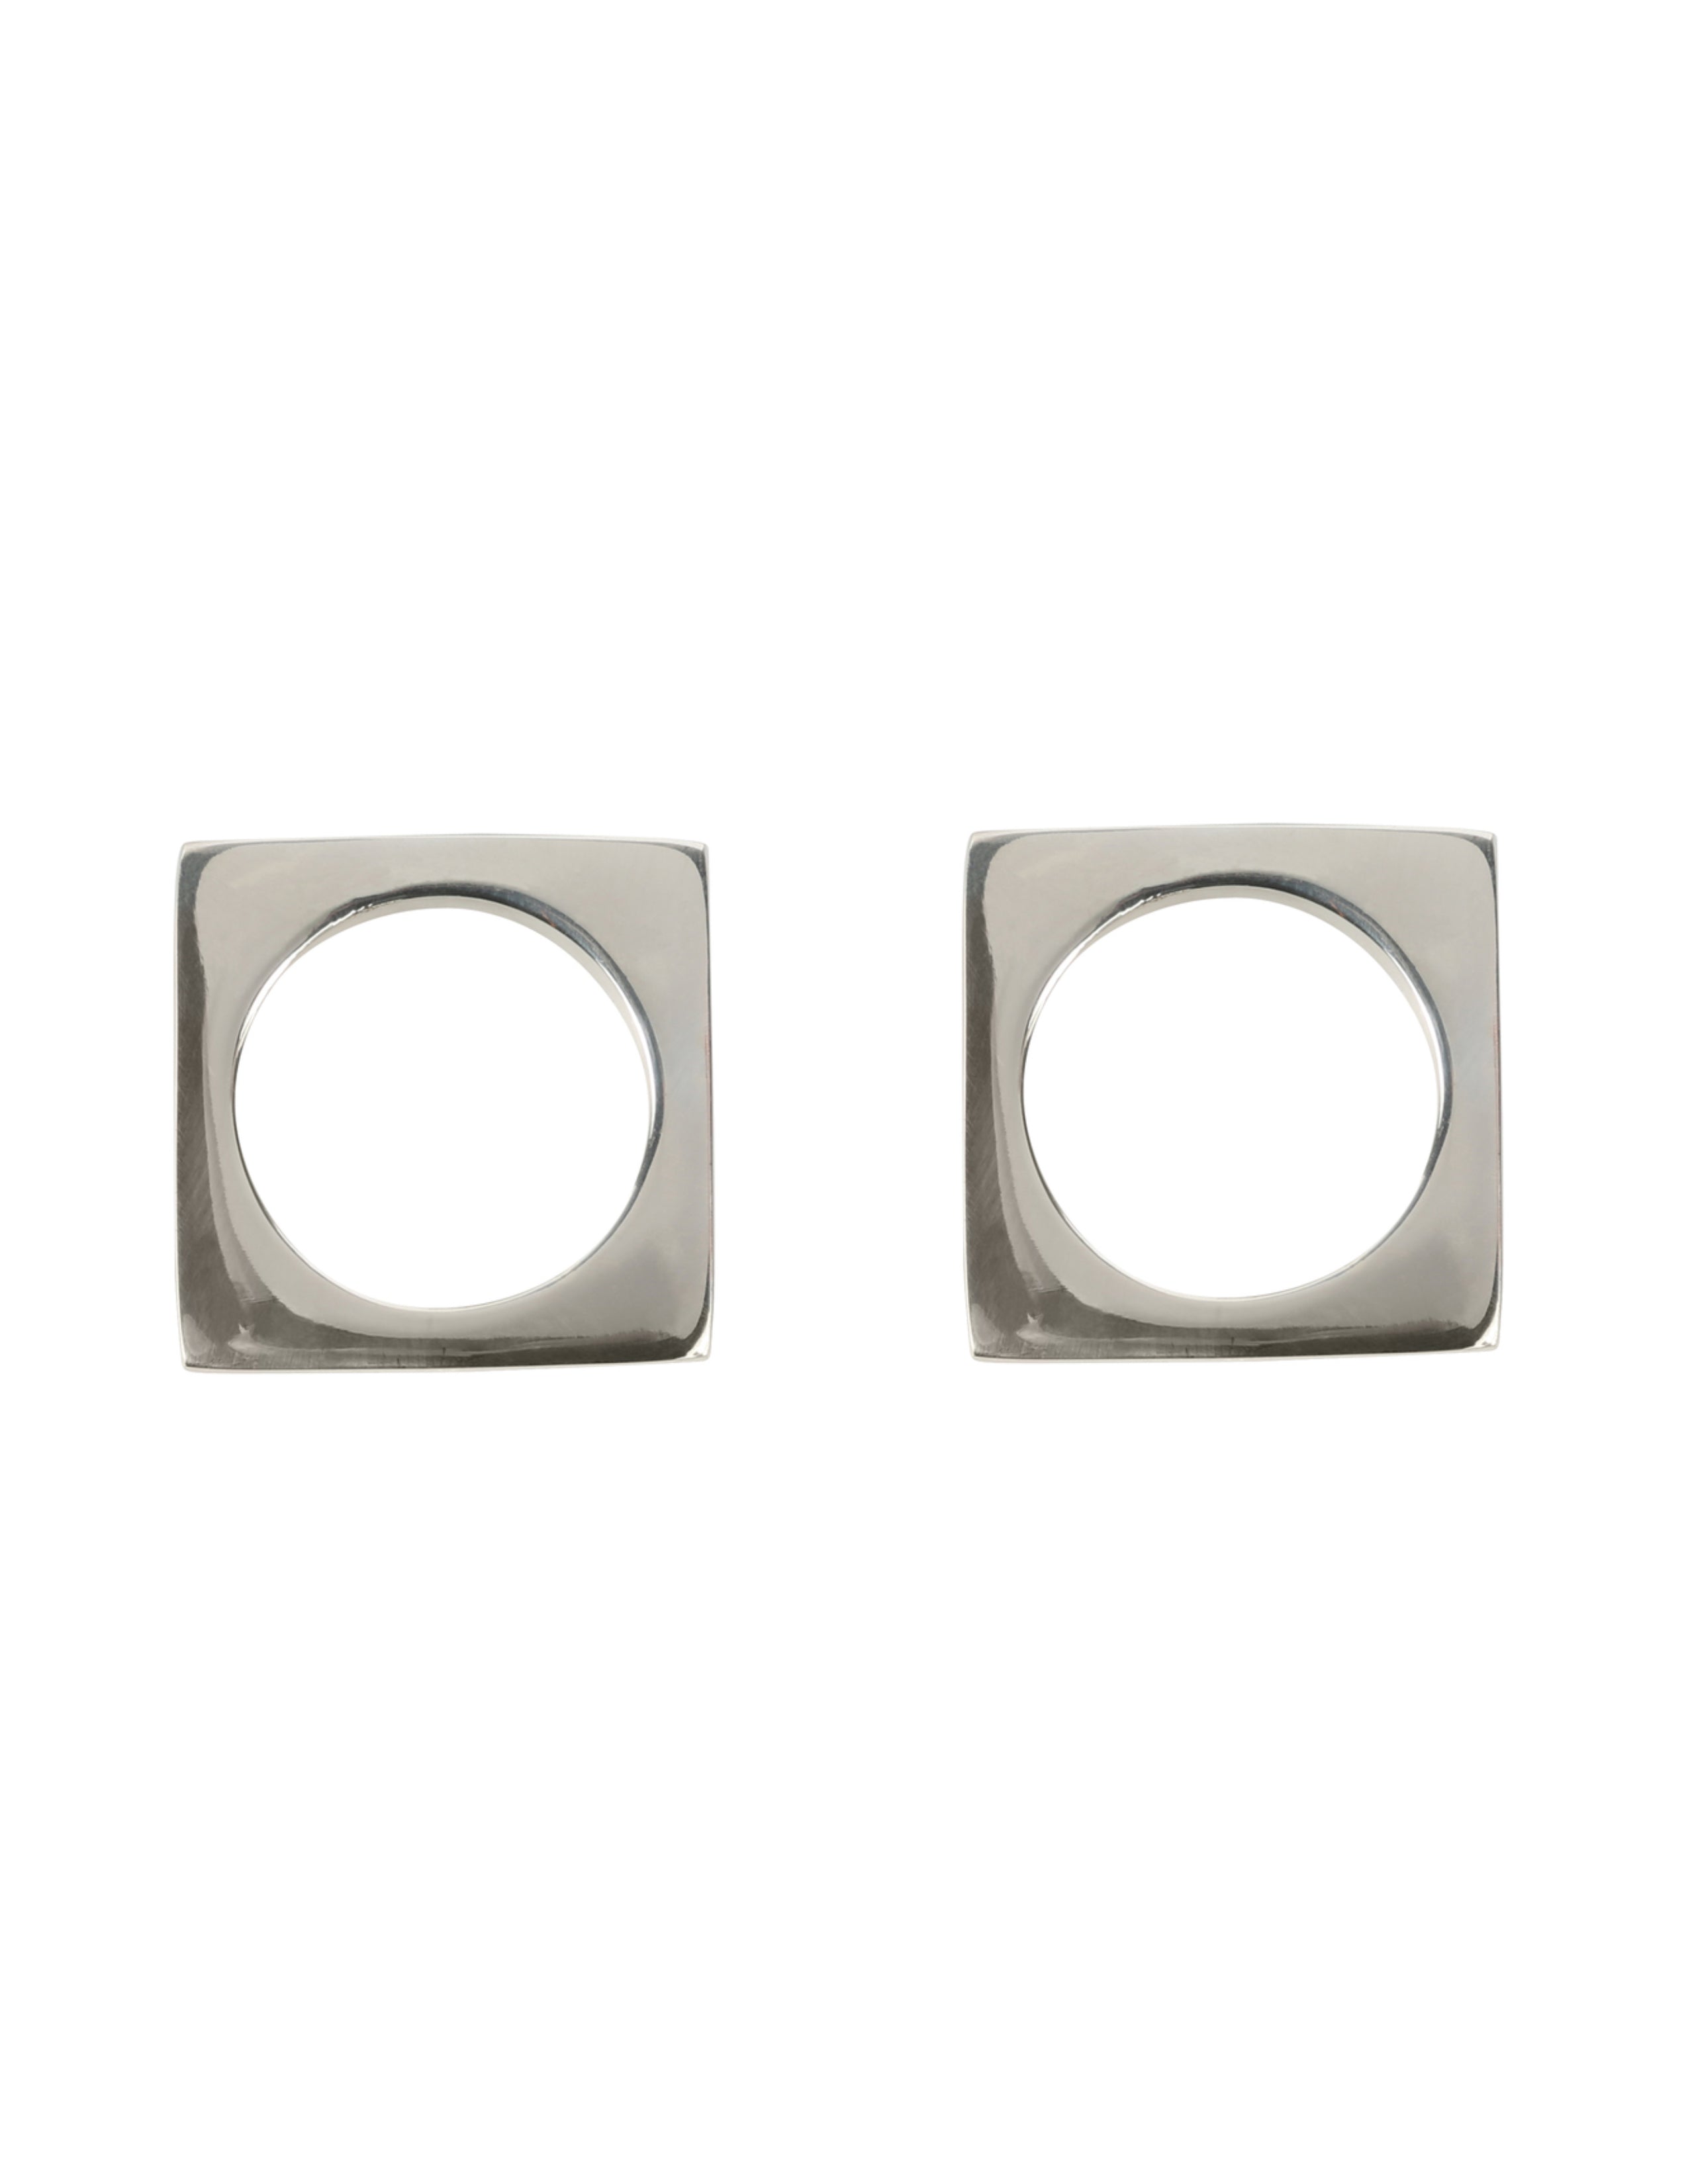 Modernist Napkin Ring Set of 2 - Silver Plated